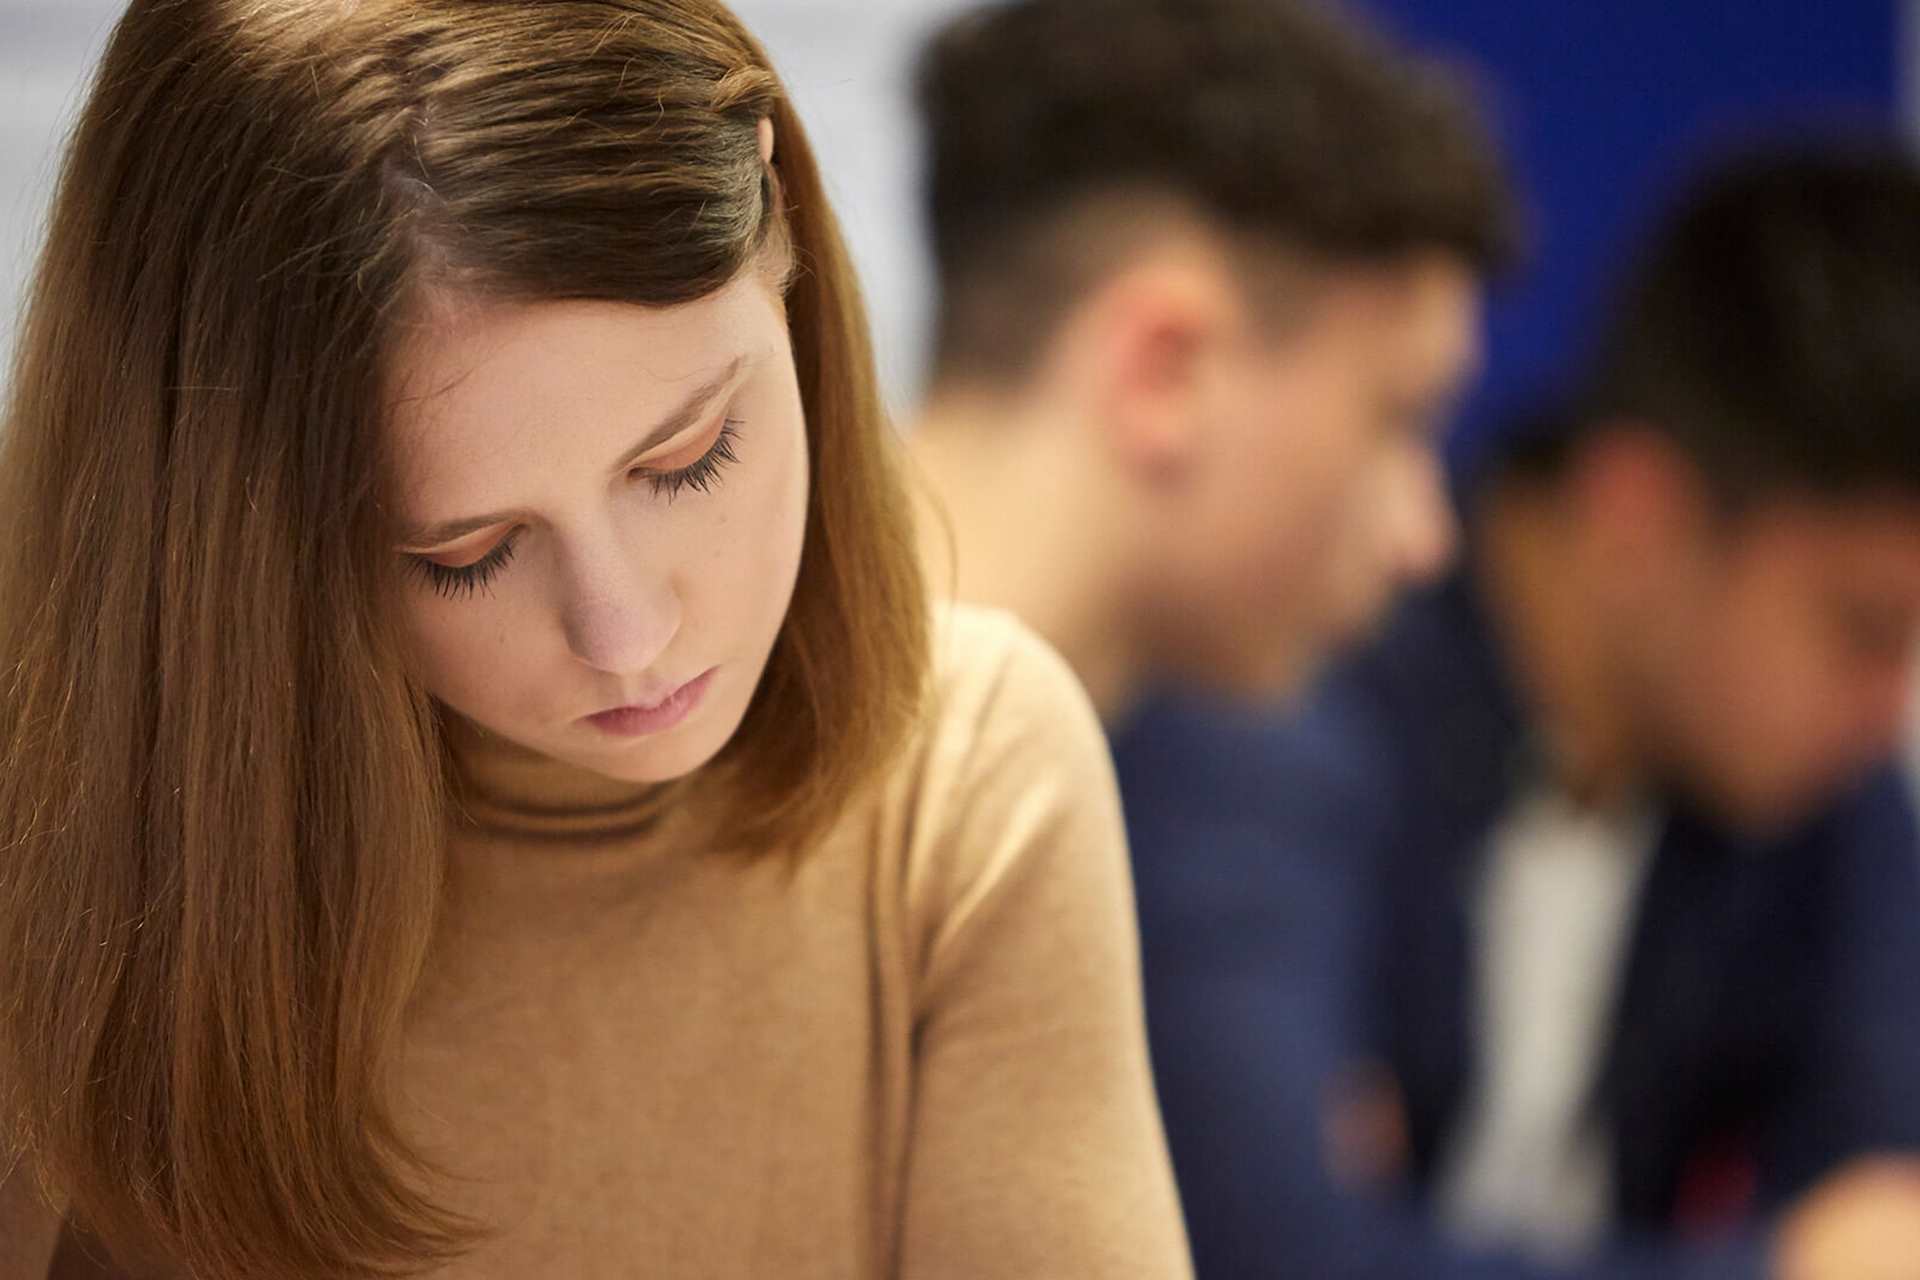 A young woman in a brown jumper looking down with a sad expression with two young men in the background.